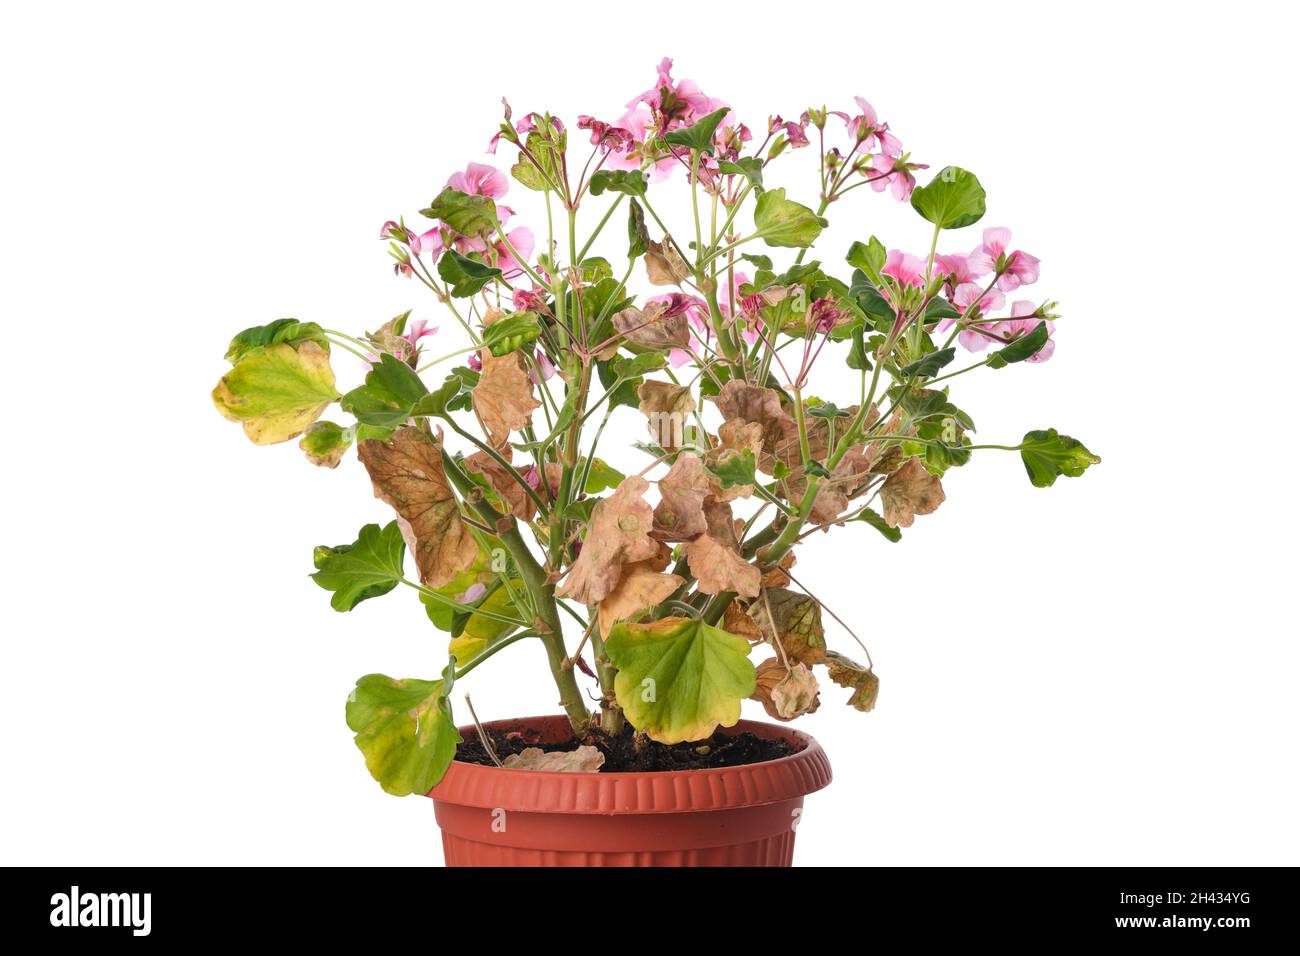 Diseased geranium flower with withered leaves in a pot isolated on white background. Stock Photo